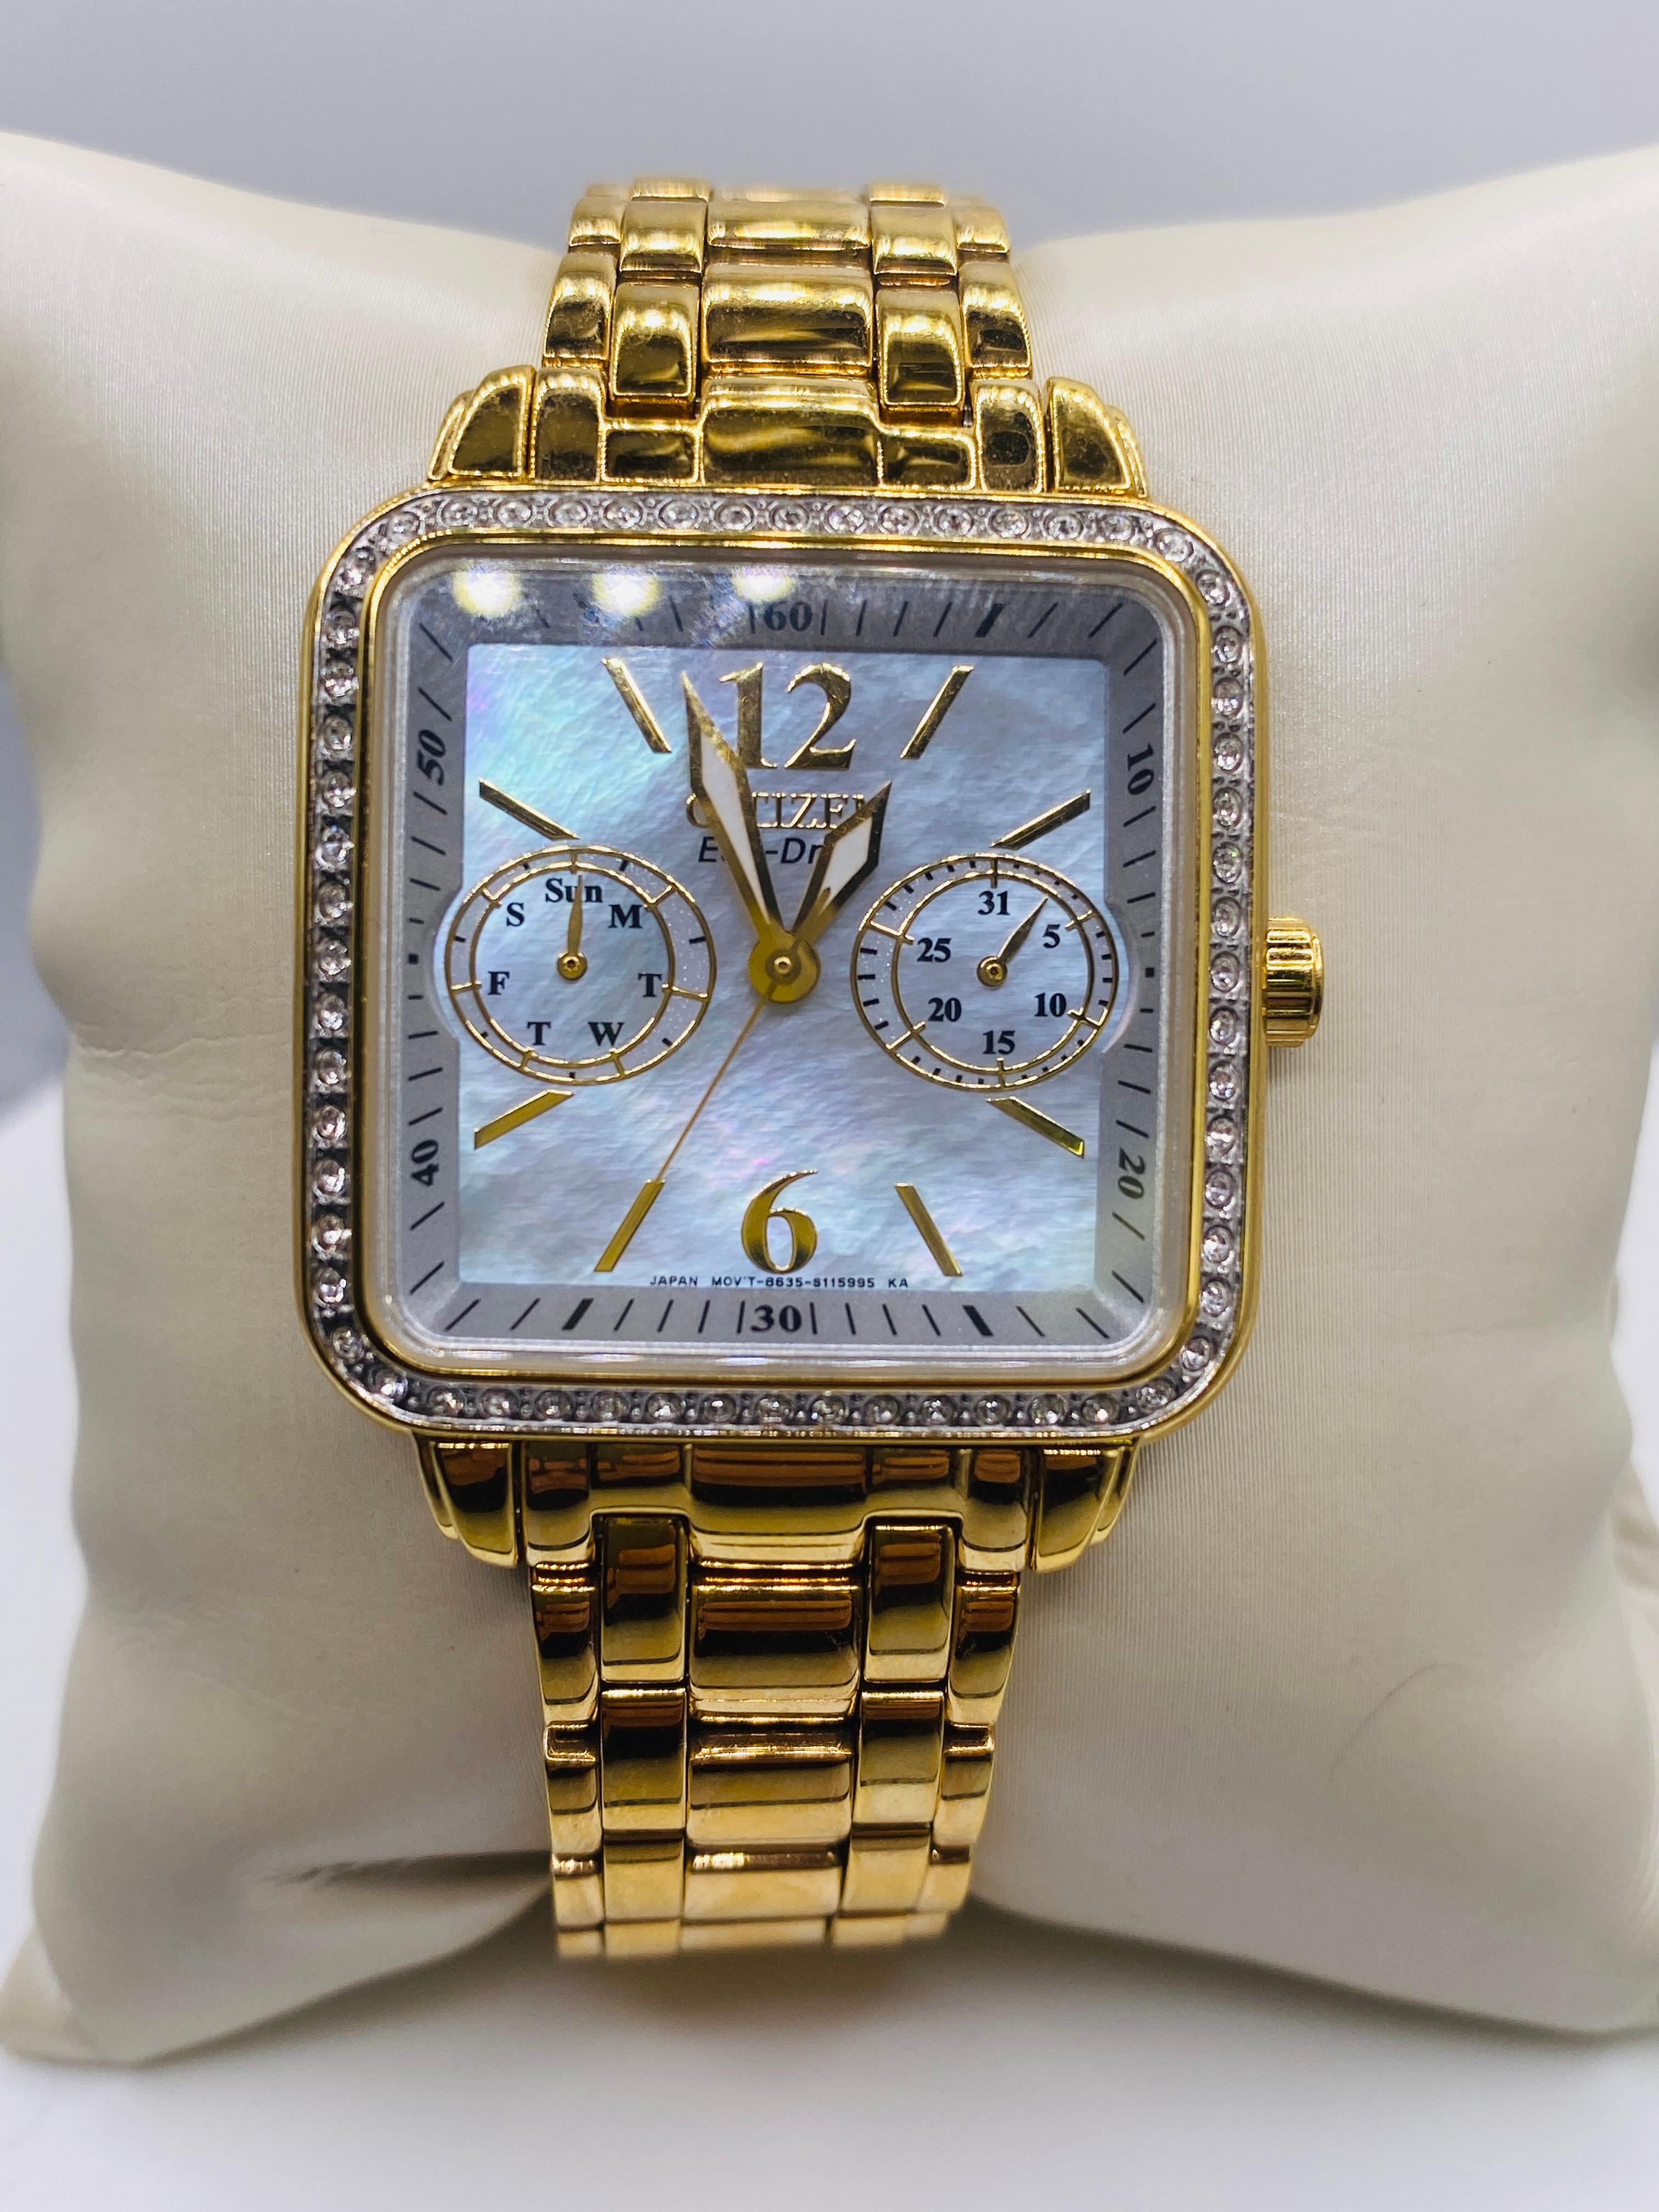 Citizen Eco Drive Watch with Swarovski Crystals and Mother of Pearl Dial. Yellow gold plated stainless steel 32mm case and bezel enhanced with Swarovski crystals. Water Resistant. Fold over clasp with push button.  Movement/Case No. 8635-S079586.